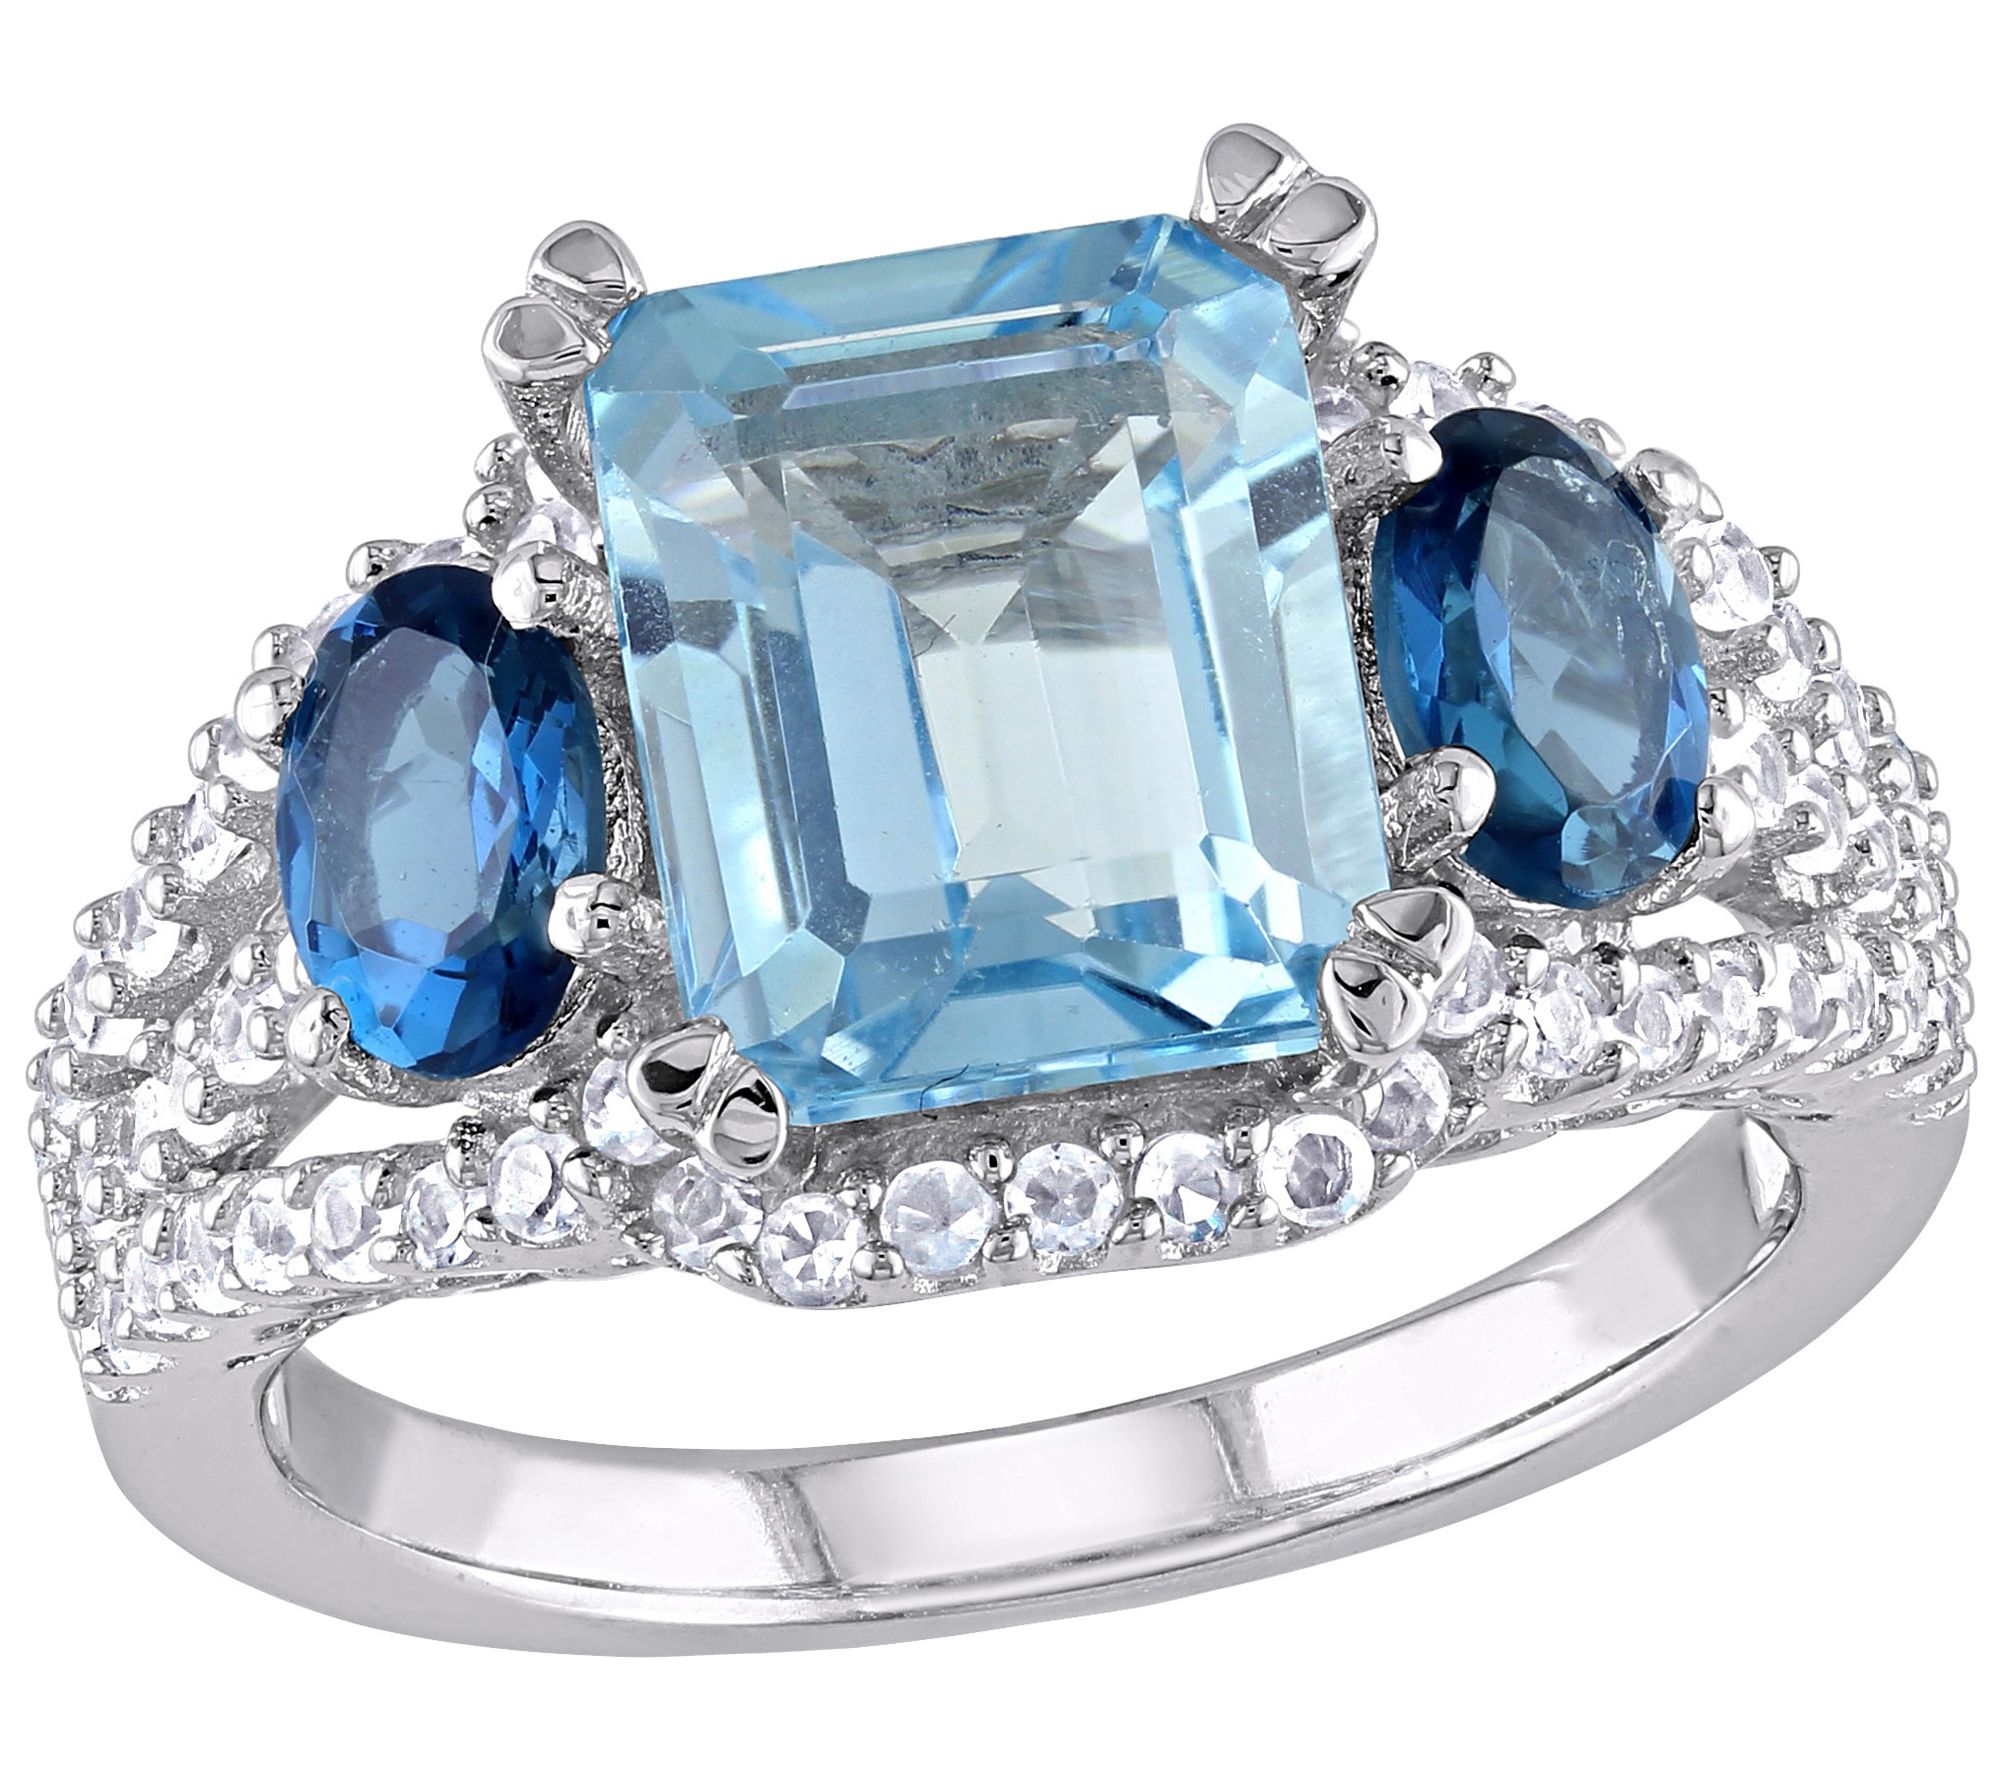 Sterling 5.70 cttw Blue Topaz & Simulated WhiteSapphire Ring - QVC.com